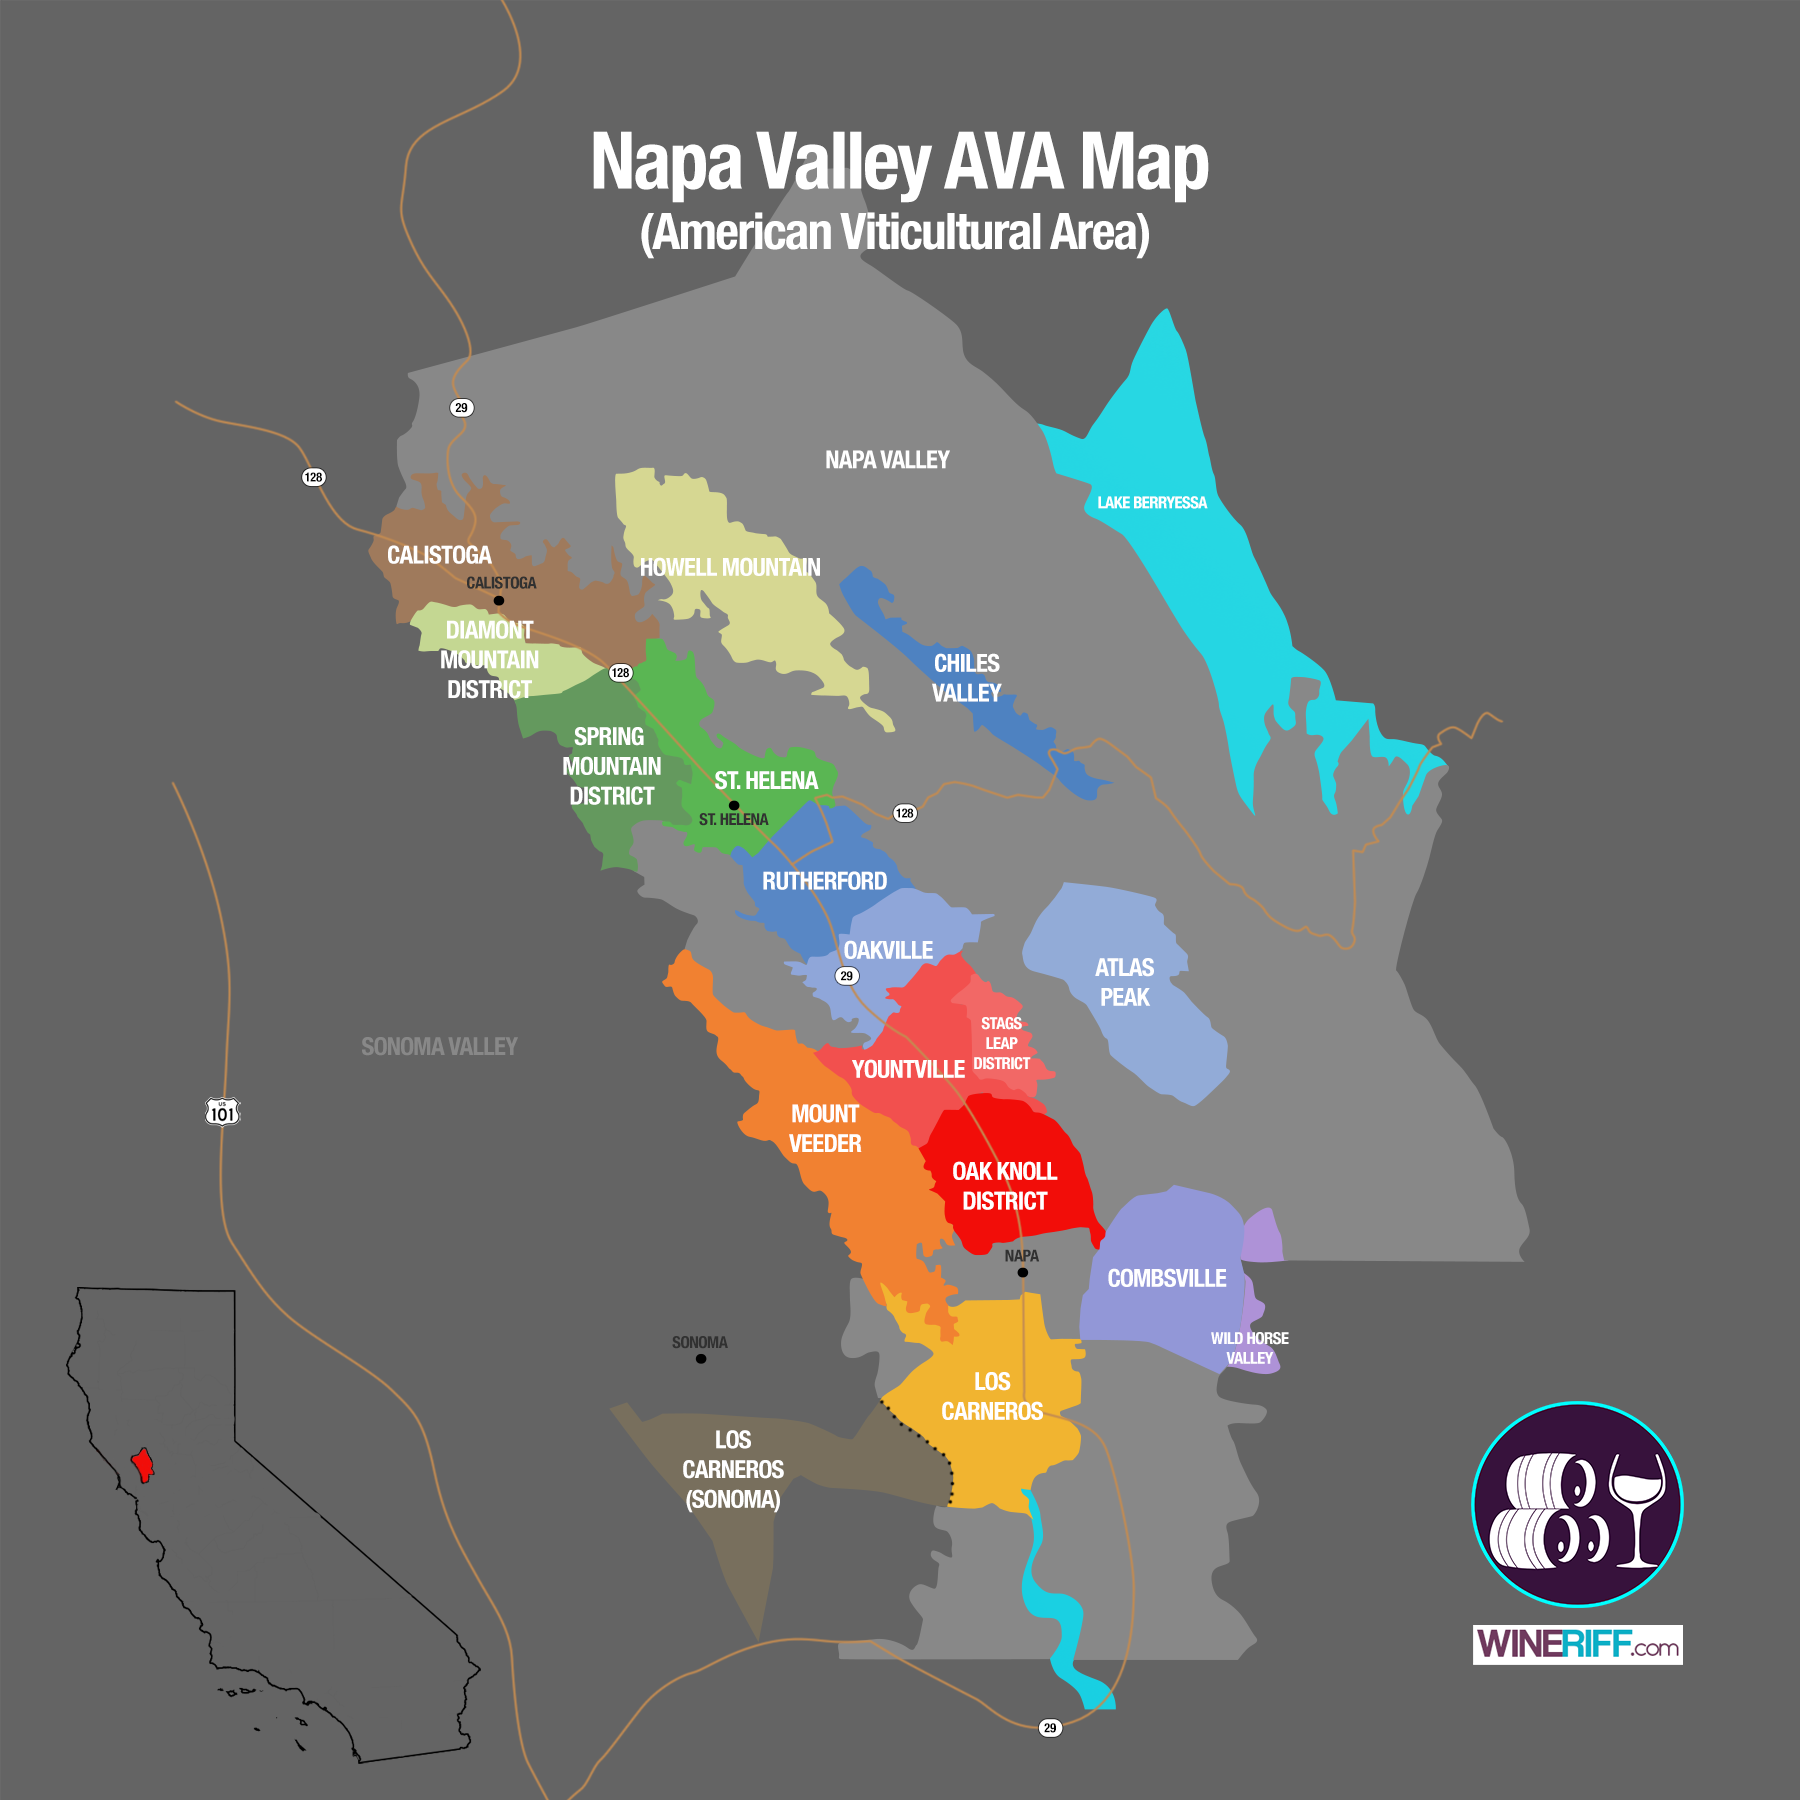 alt="Napa Valley American Viticultural Area map"